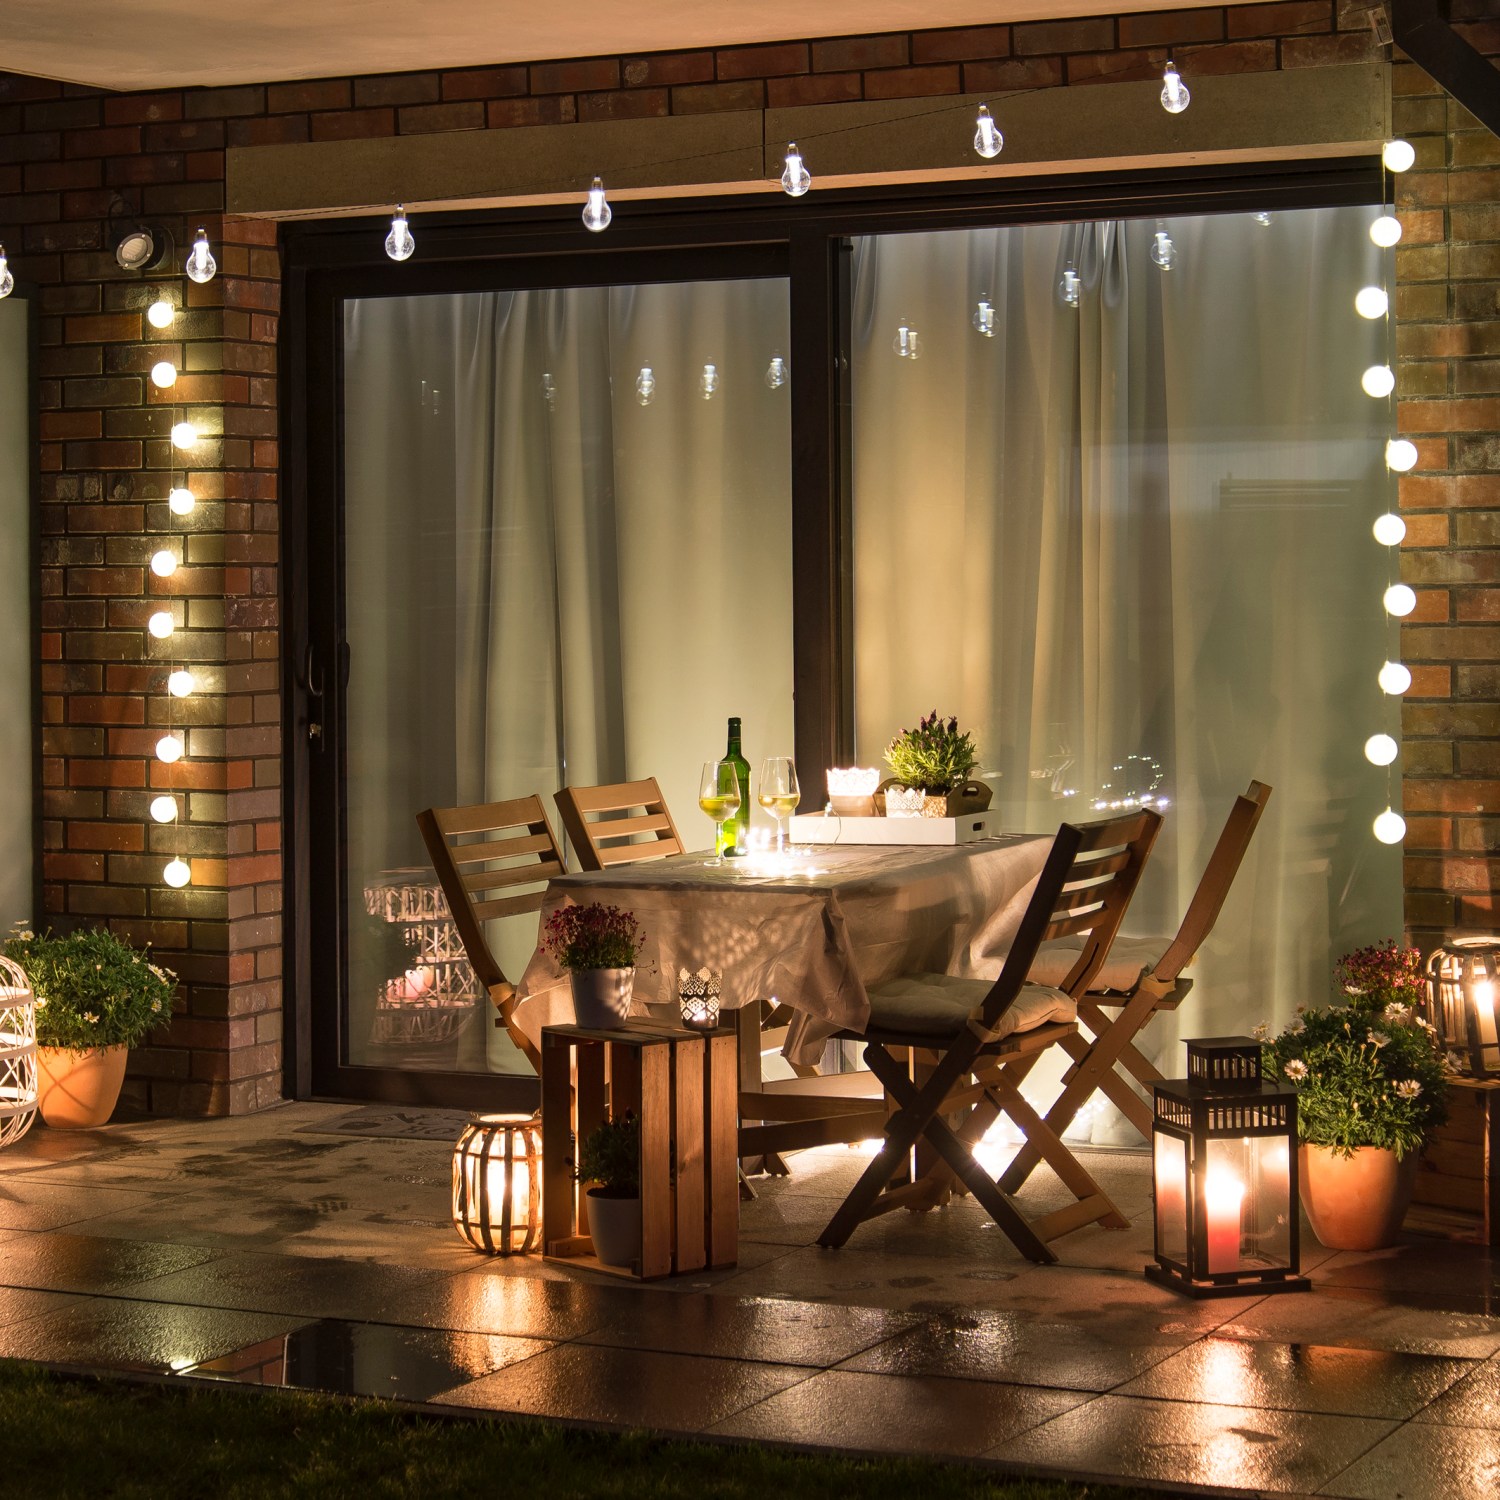 outdoor patio at night with a string lights around the sliding door and above a wooden table with candles and lanterns illuminating the terrace